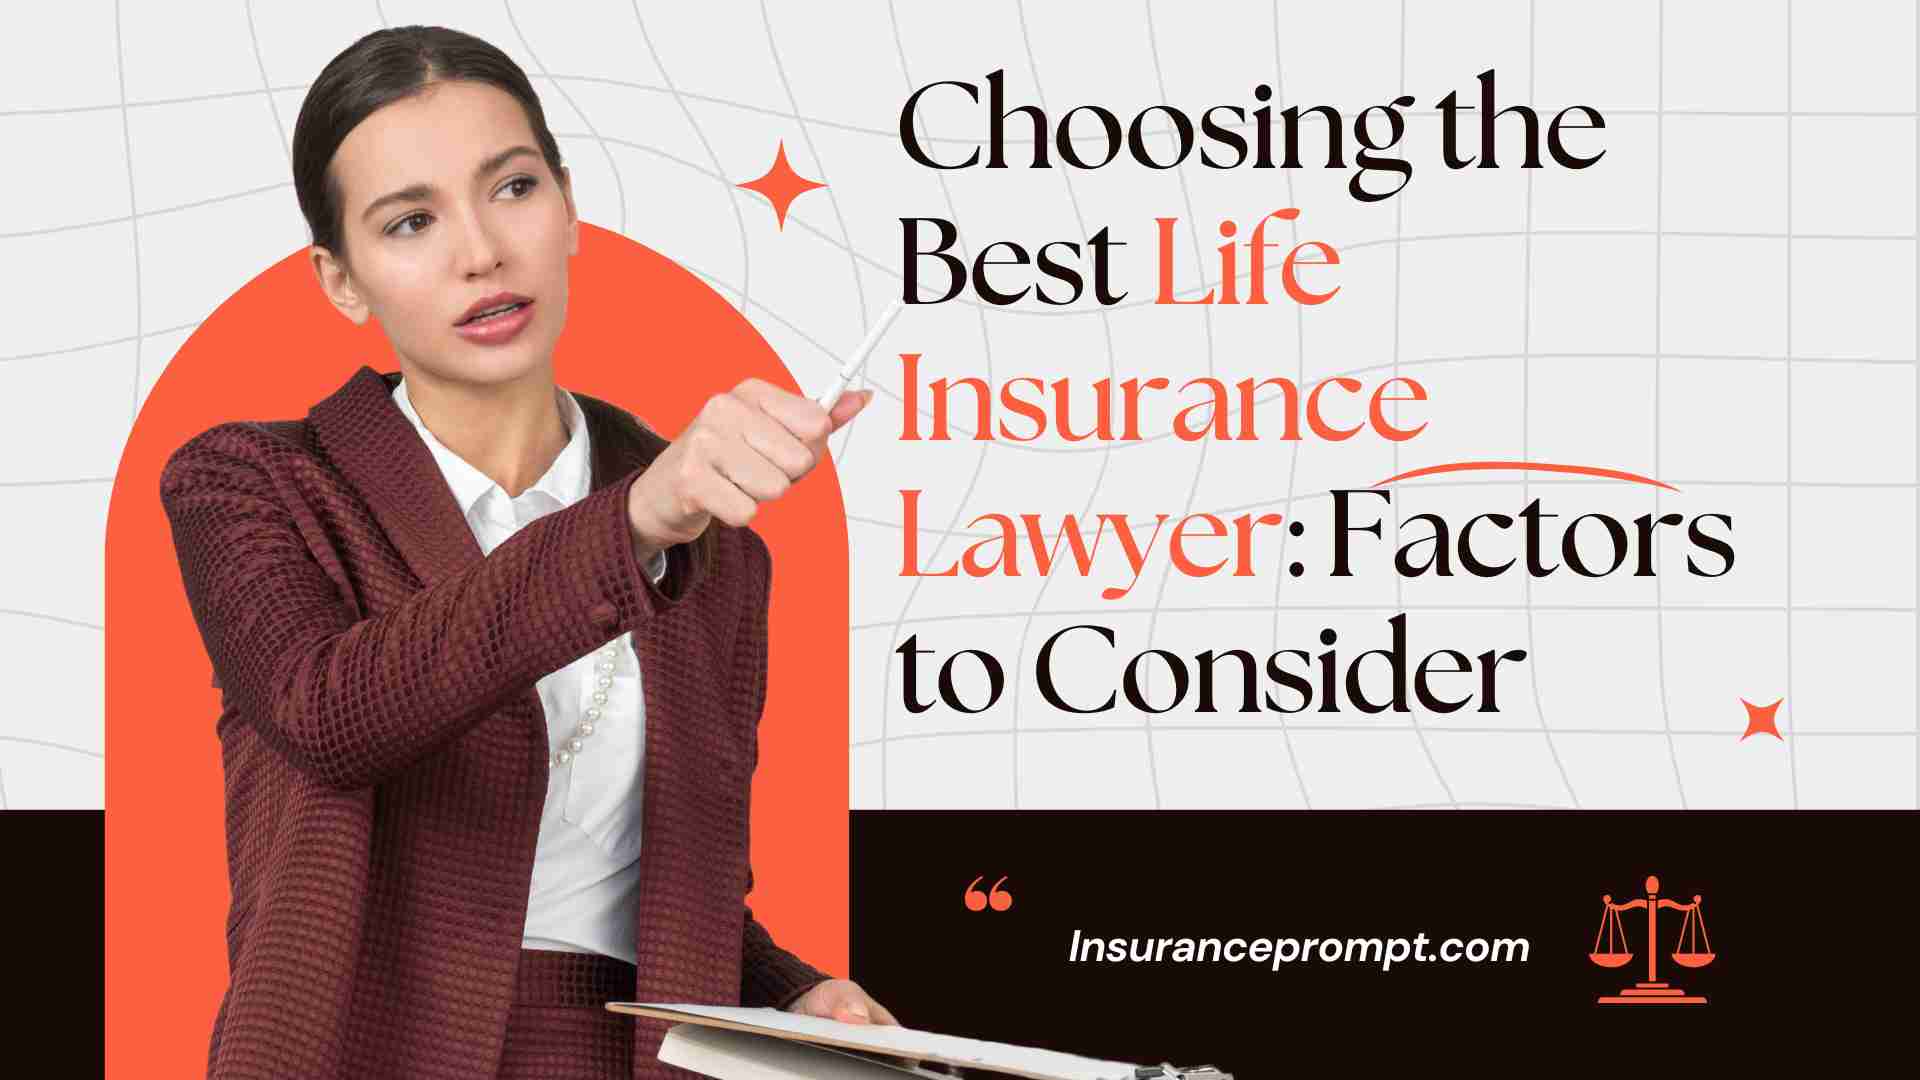 Choosing the Best Life Insurance Lawyer: Factors to Consider